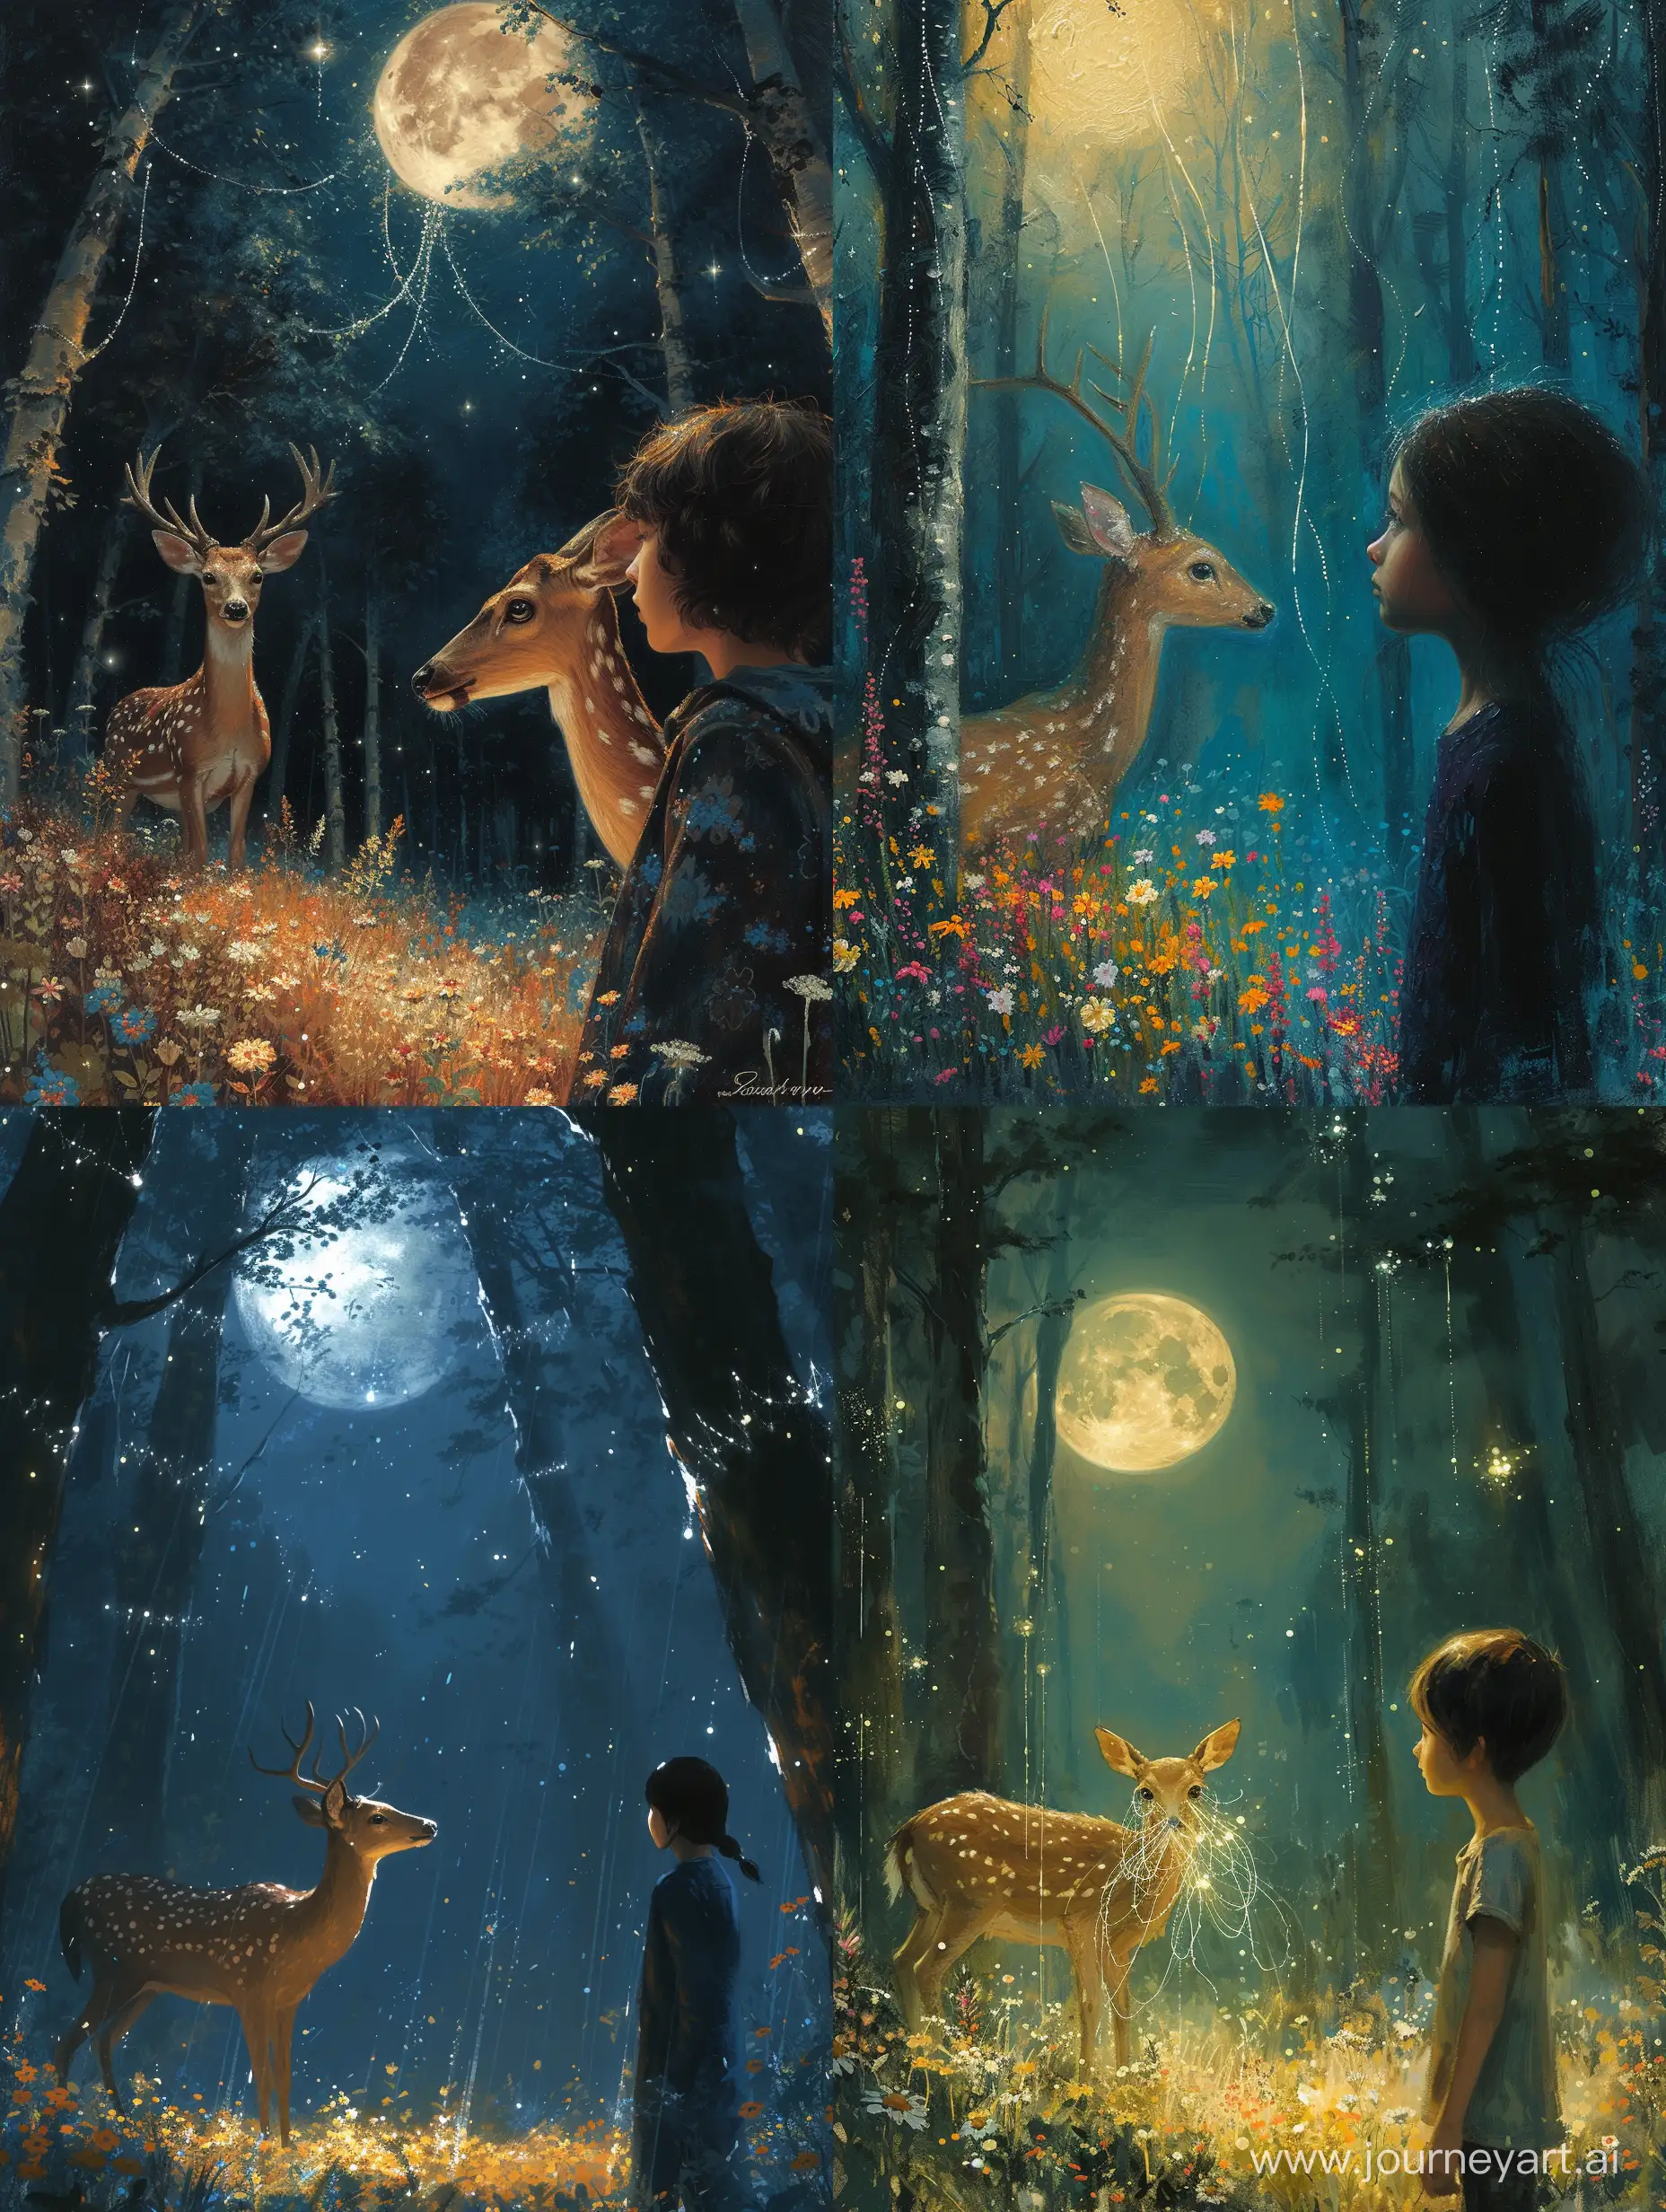 Imagine a moonlit forest bathed in a soft, ethereal glow. Tall, slender trees stretch towards the sky, their branches reaching out like embracing arms. In the foreground, a graceful deer stands amidst a vibrant carpet of wildflowers, its eyes reflecting a captivating enchantment.

Picture a human figure facing the deer, their head slightly tilted, gazing deeply into the deer's soulful eyes. The person's expression carries a mix of awe, longing, and vulnerability, as if surrendering to the power of love.

Intertwined with the flora and fauna, delicate strands of shimmering light weave through the scene, casting an aura of mystery and wonder. These strands emanate from the deer's eyes, symbolizing the enchanting magic that binds hearts together.

Using your creative brushstrokes and color palette, bring this enchanting reverie to life. Paint the moonlit forest with its serene ambiance, the deer with its grace and elegance, and the human figure with their introspective expression. Let the colors and textures reflect the ethereal and dreamlike qualities of this scene.

As you paint, immerse yourself in the emotions conveyed by the poem, and strive to capture the profound beauty, vulnerability, and enchantment that dance within its verses. Let your artistic interpretation create a visual masterpiece that evokes a sense of tranquility and invites viewers to reflect on the power of love and longing. --s 750